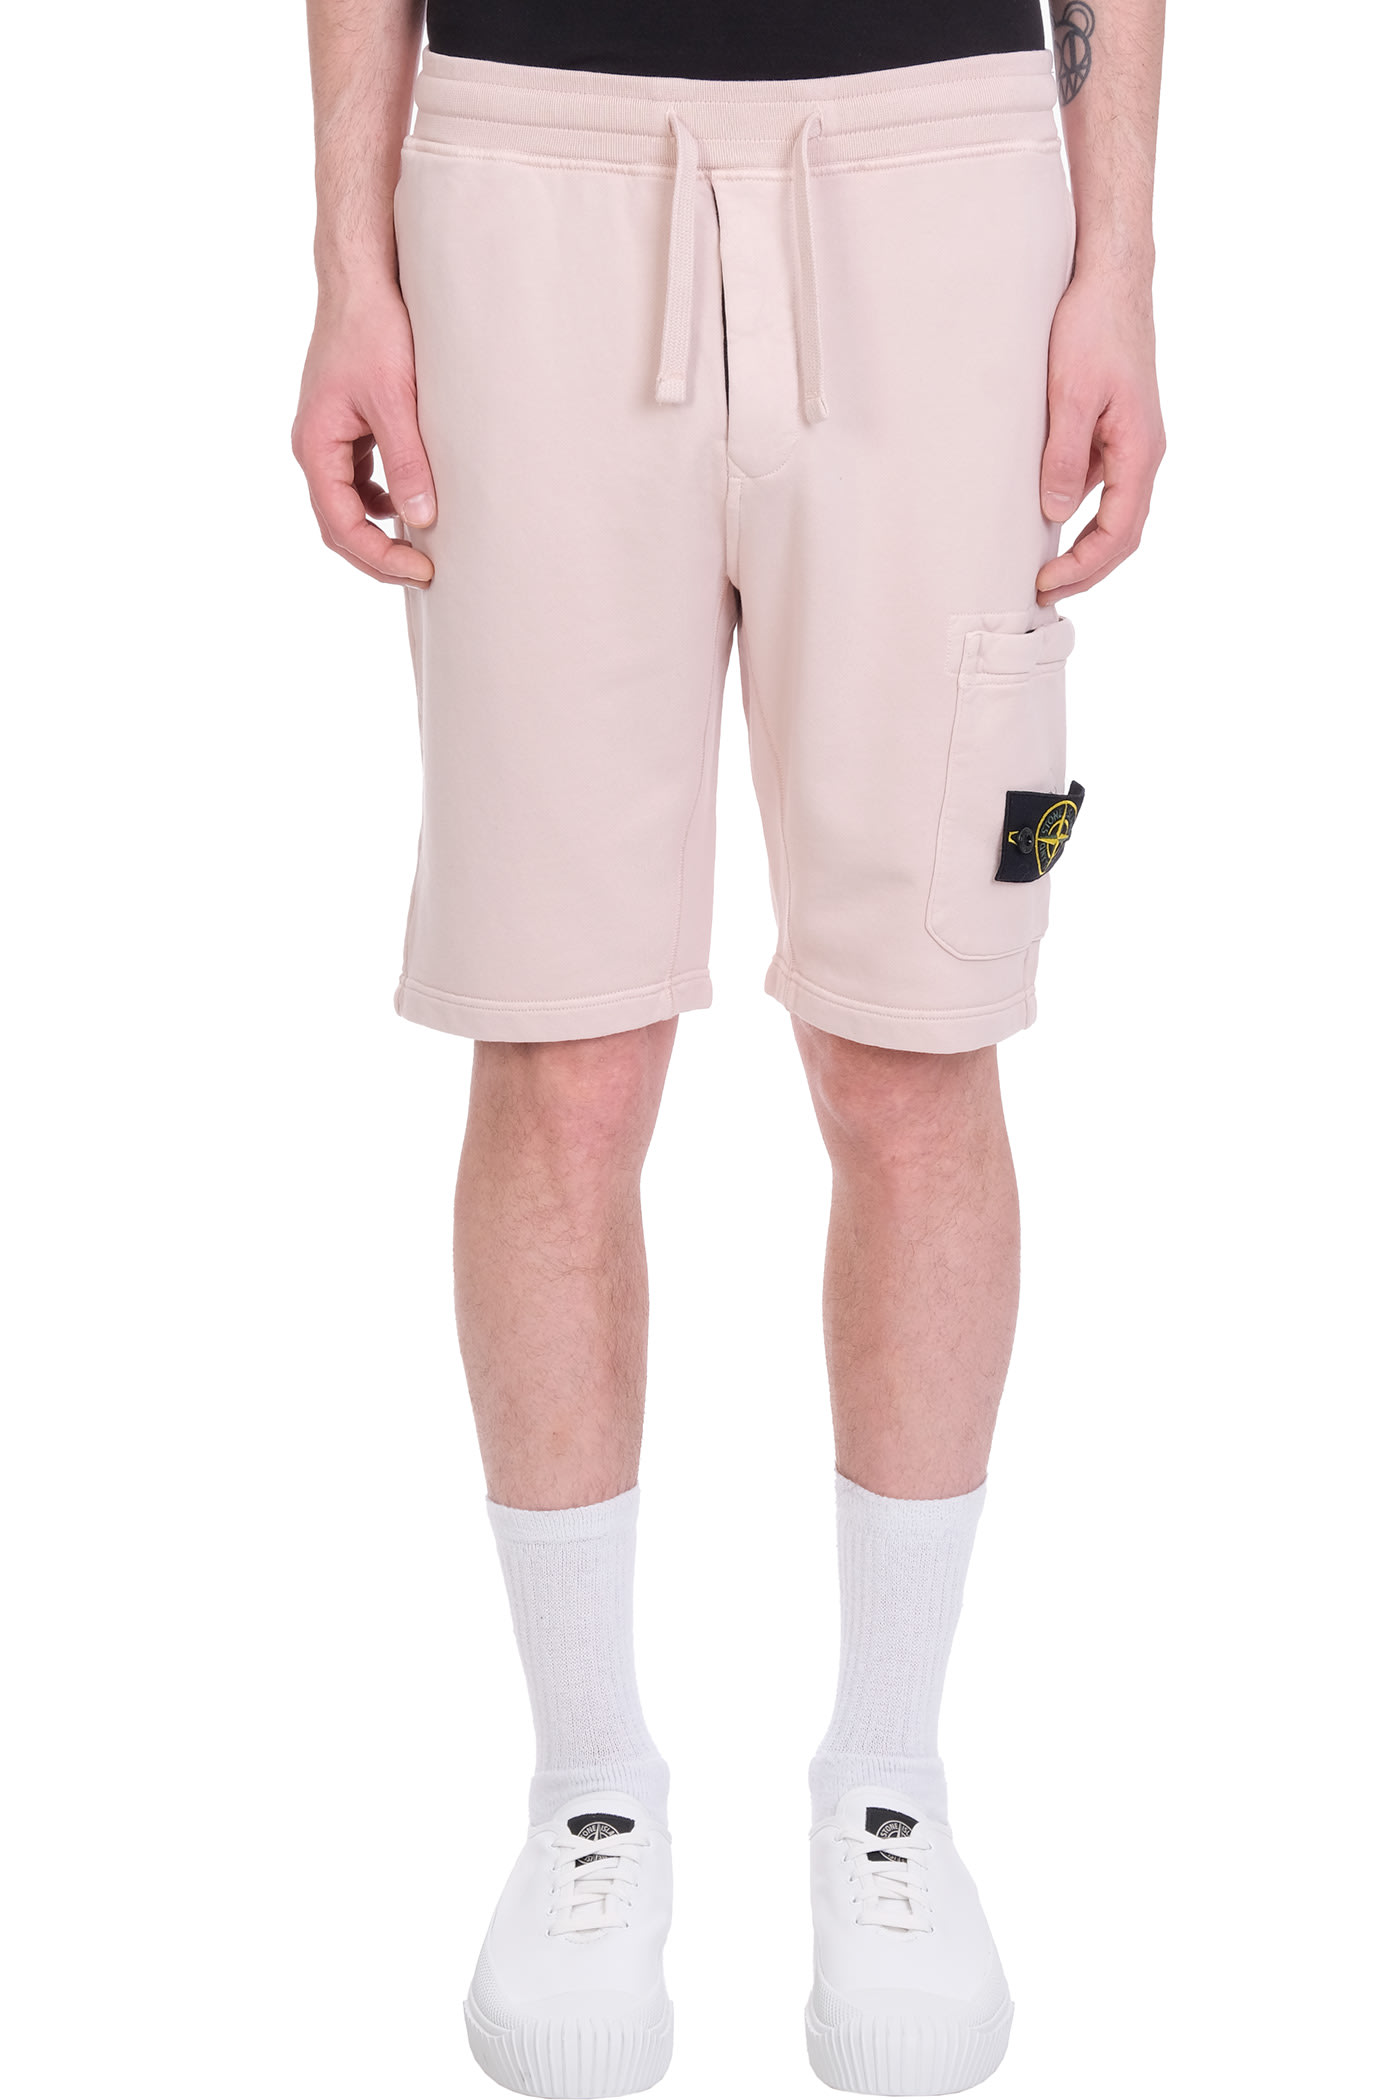 STONE ISLAND SHORTS IN ROSE-PINK COTTON,741564651V0082